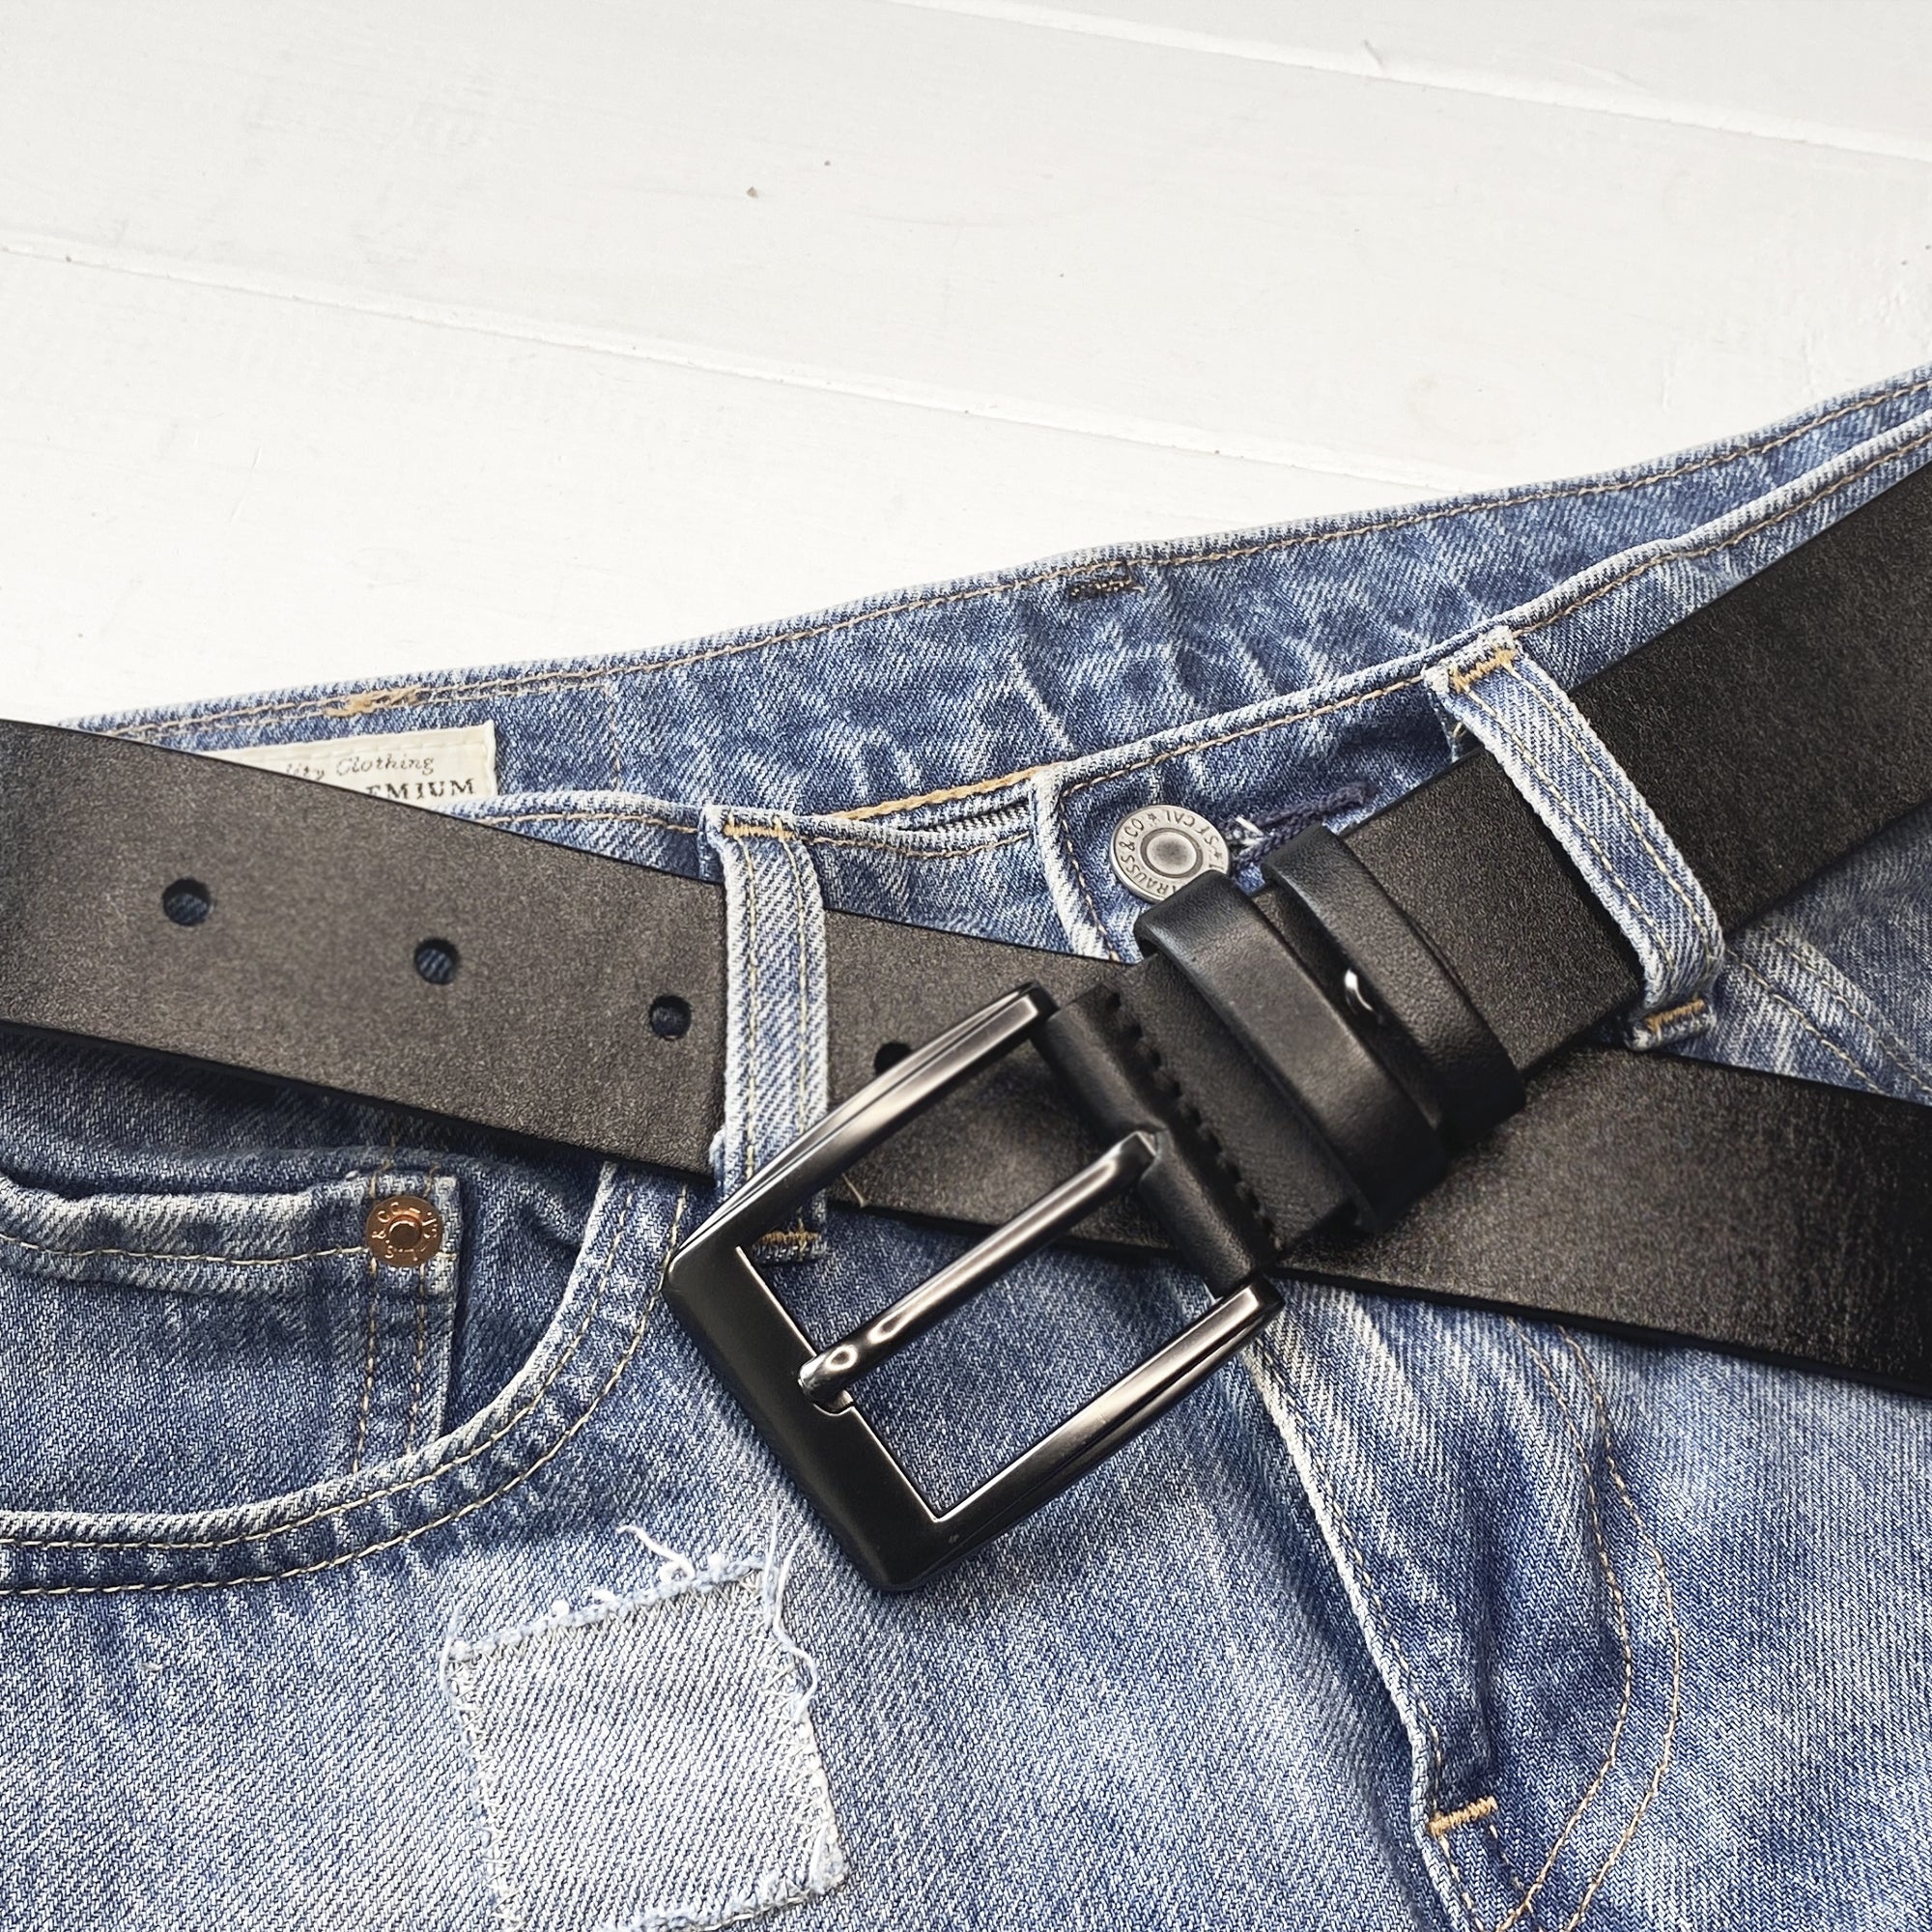 Leather Belt Black Personalized engraving